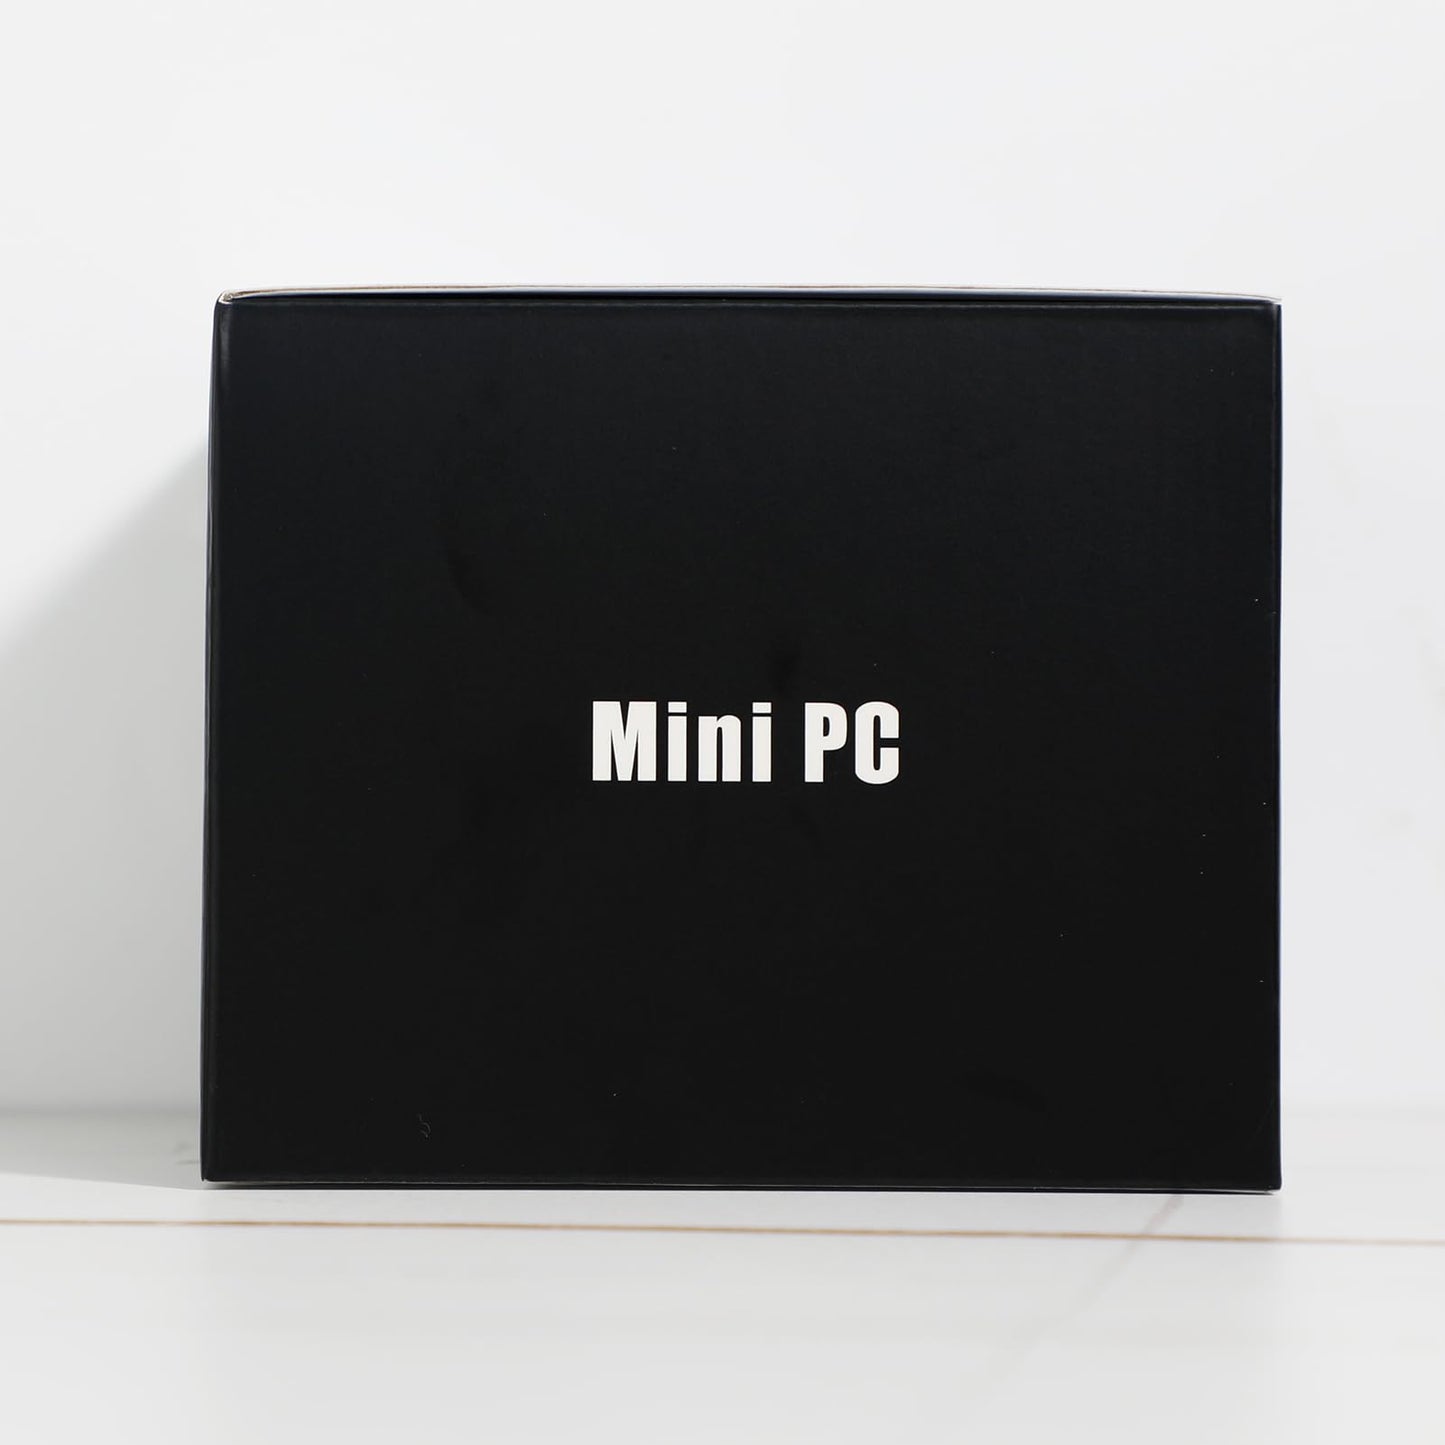 T8Plus Windows 11 Pro Mini PC €189 After ACEPRIME applicable to all products in stores At Amazon prime day!